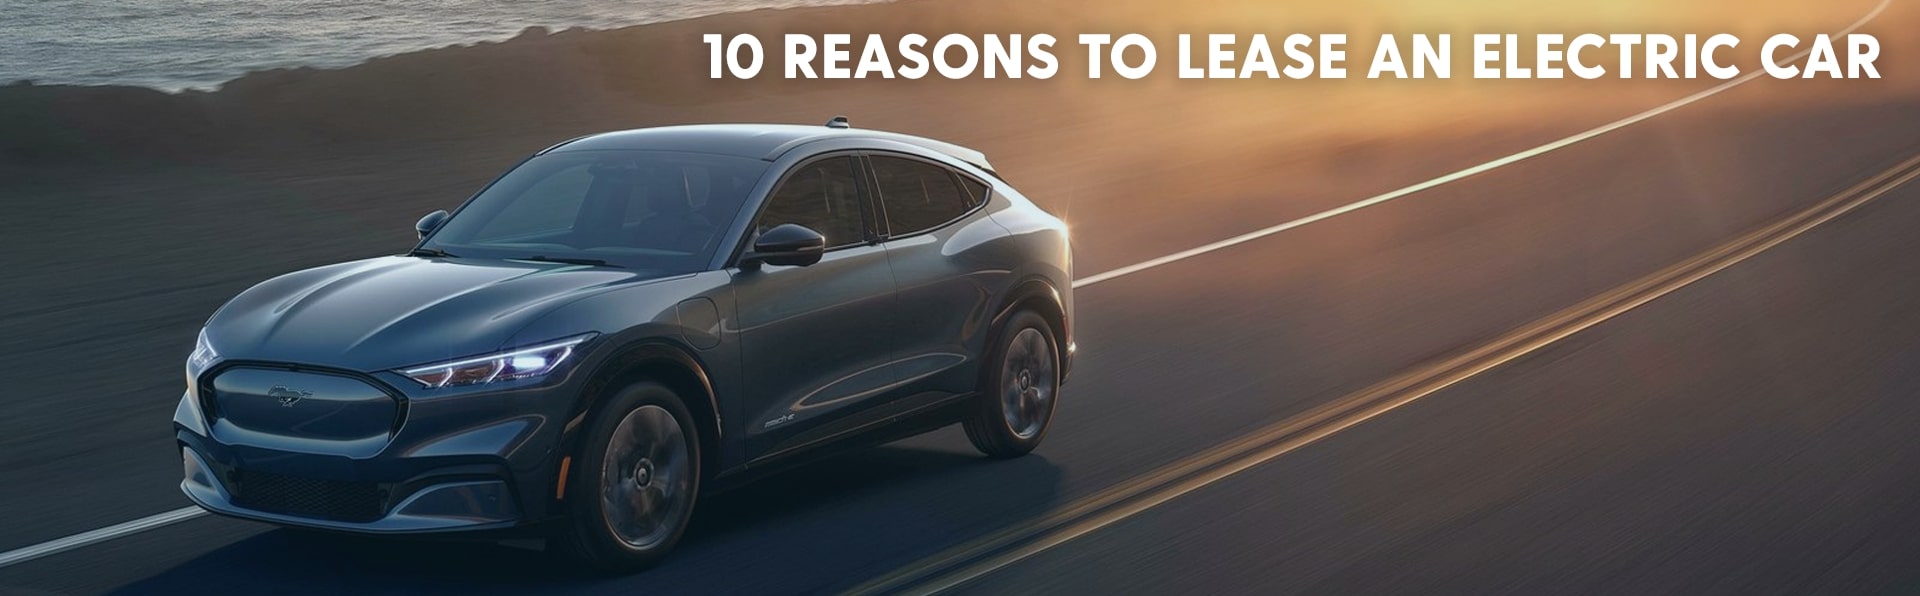 10 Reasons To Lease An Electric Car